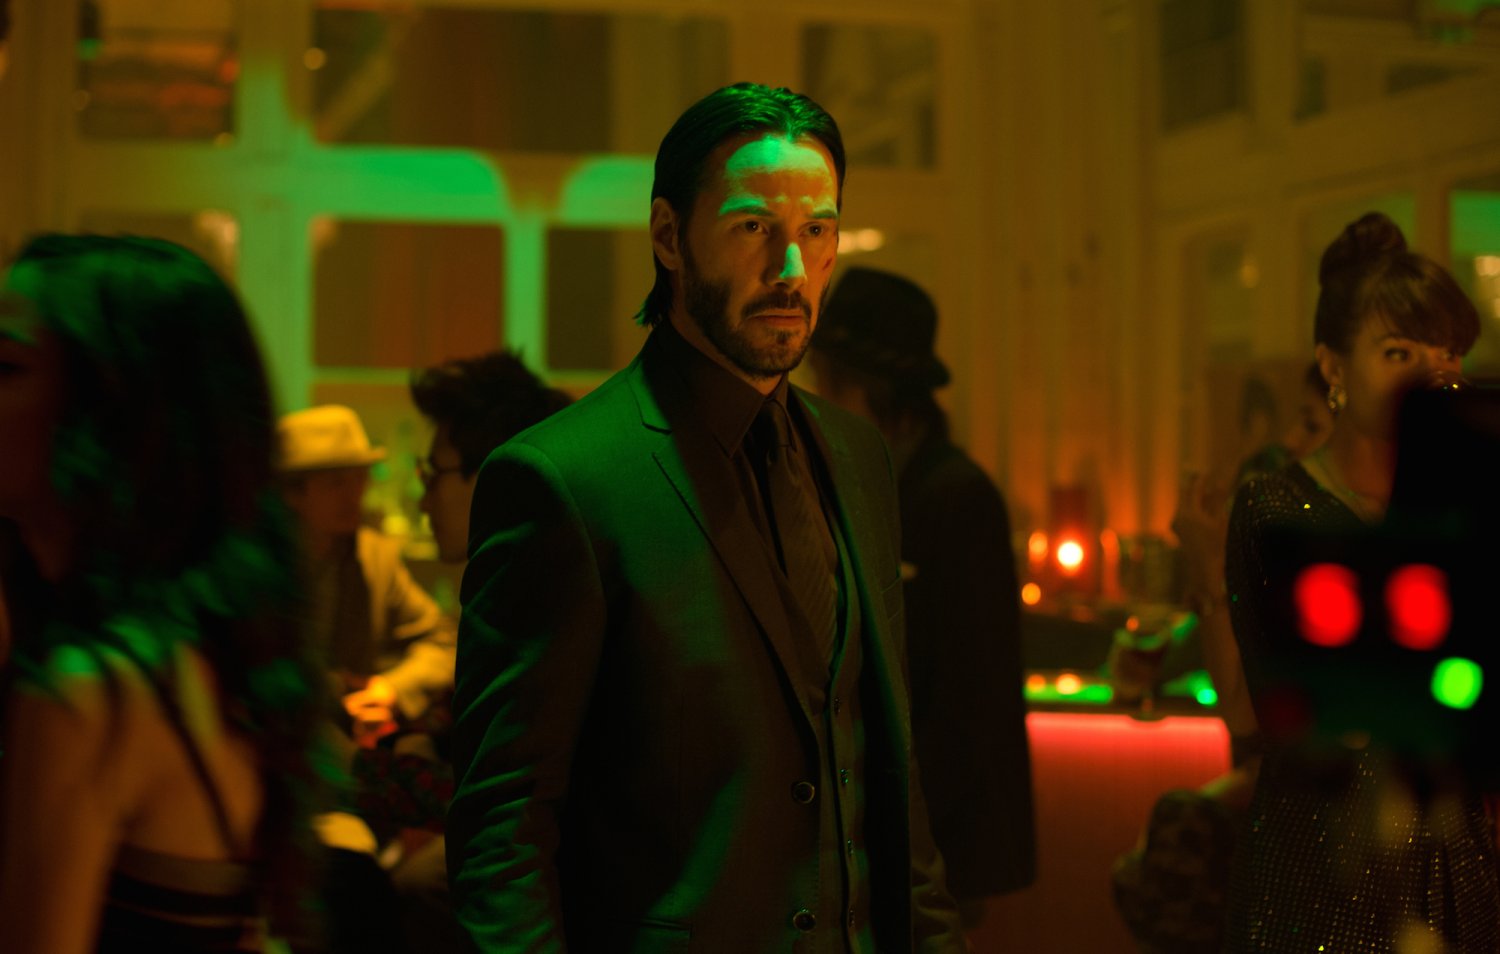 Who is John Wick? | Page 2 of 2| Confusions and Connections